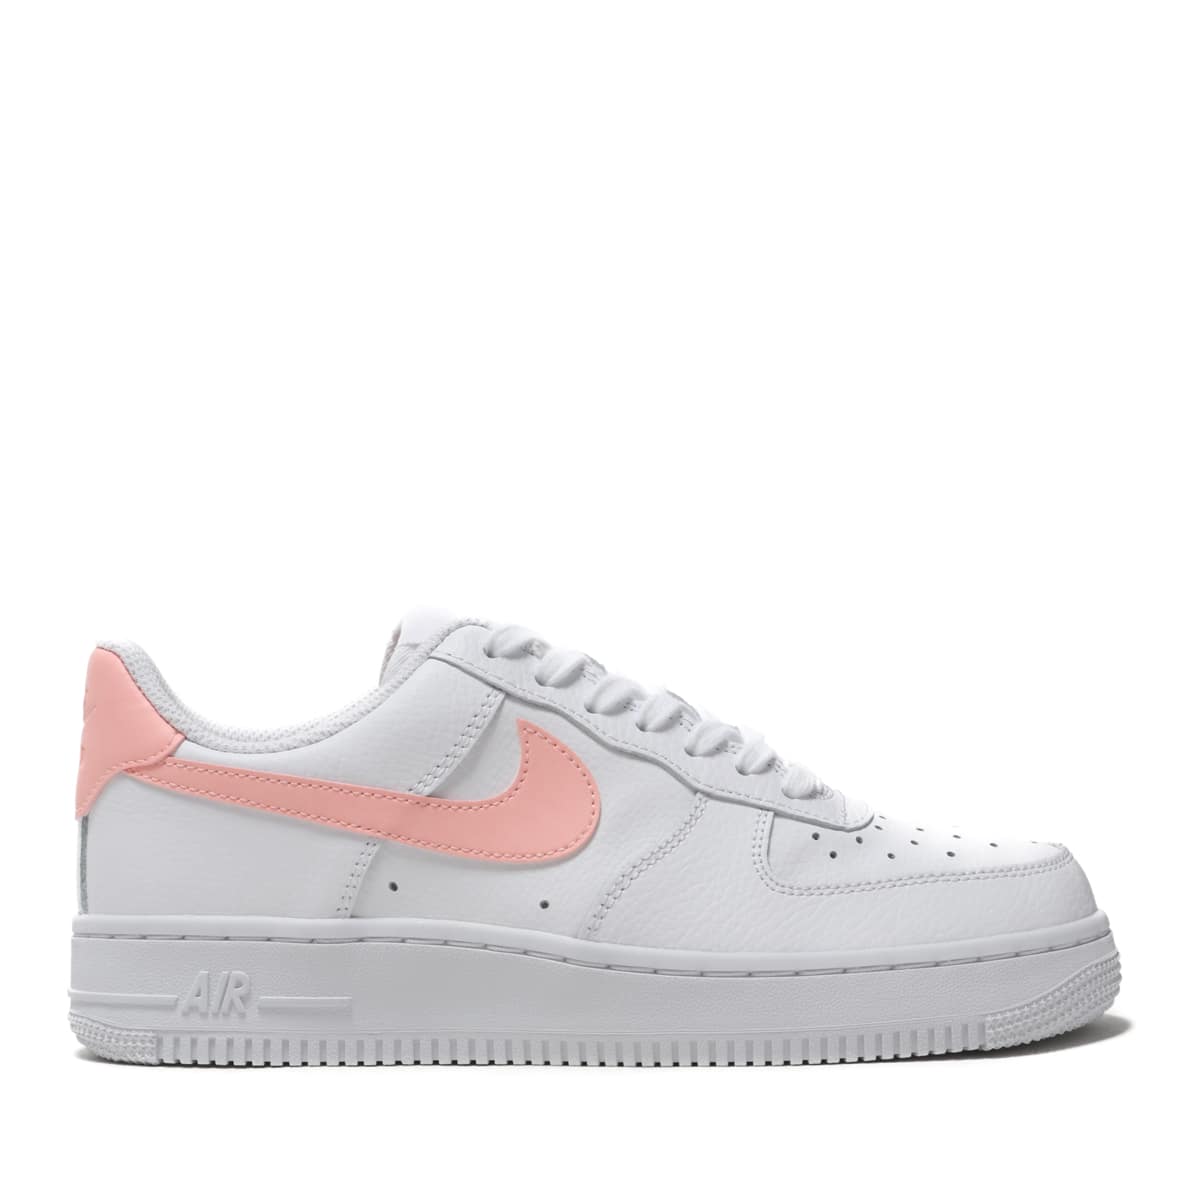 NIKE WMNS AIR FORCE 1 '07 WHITE/ORACLE 